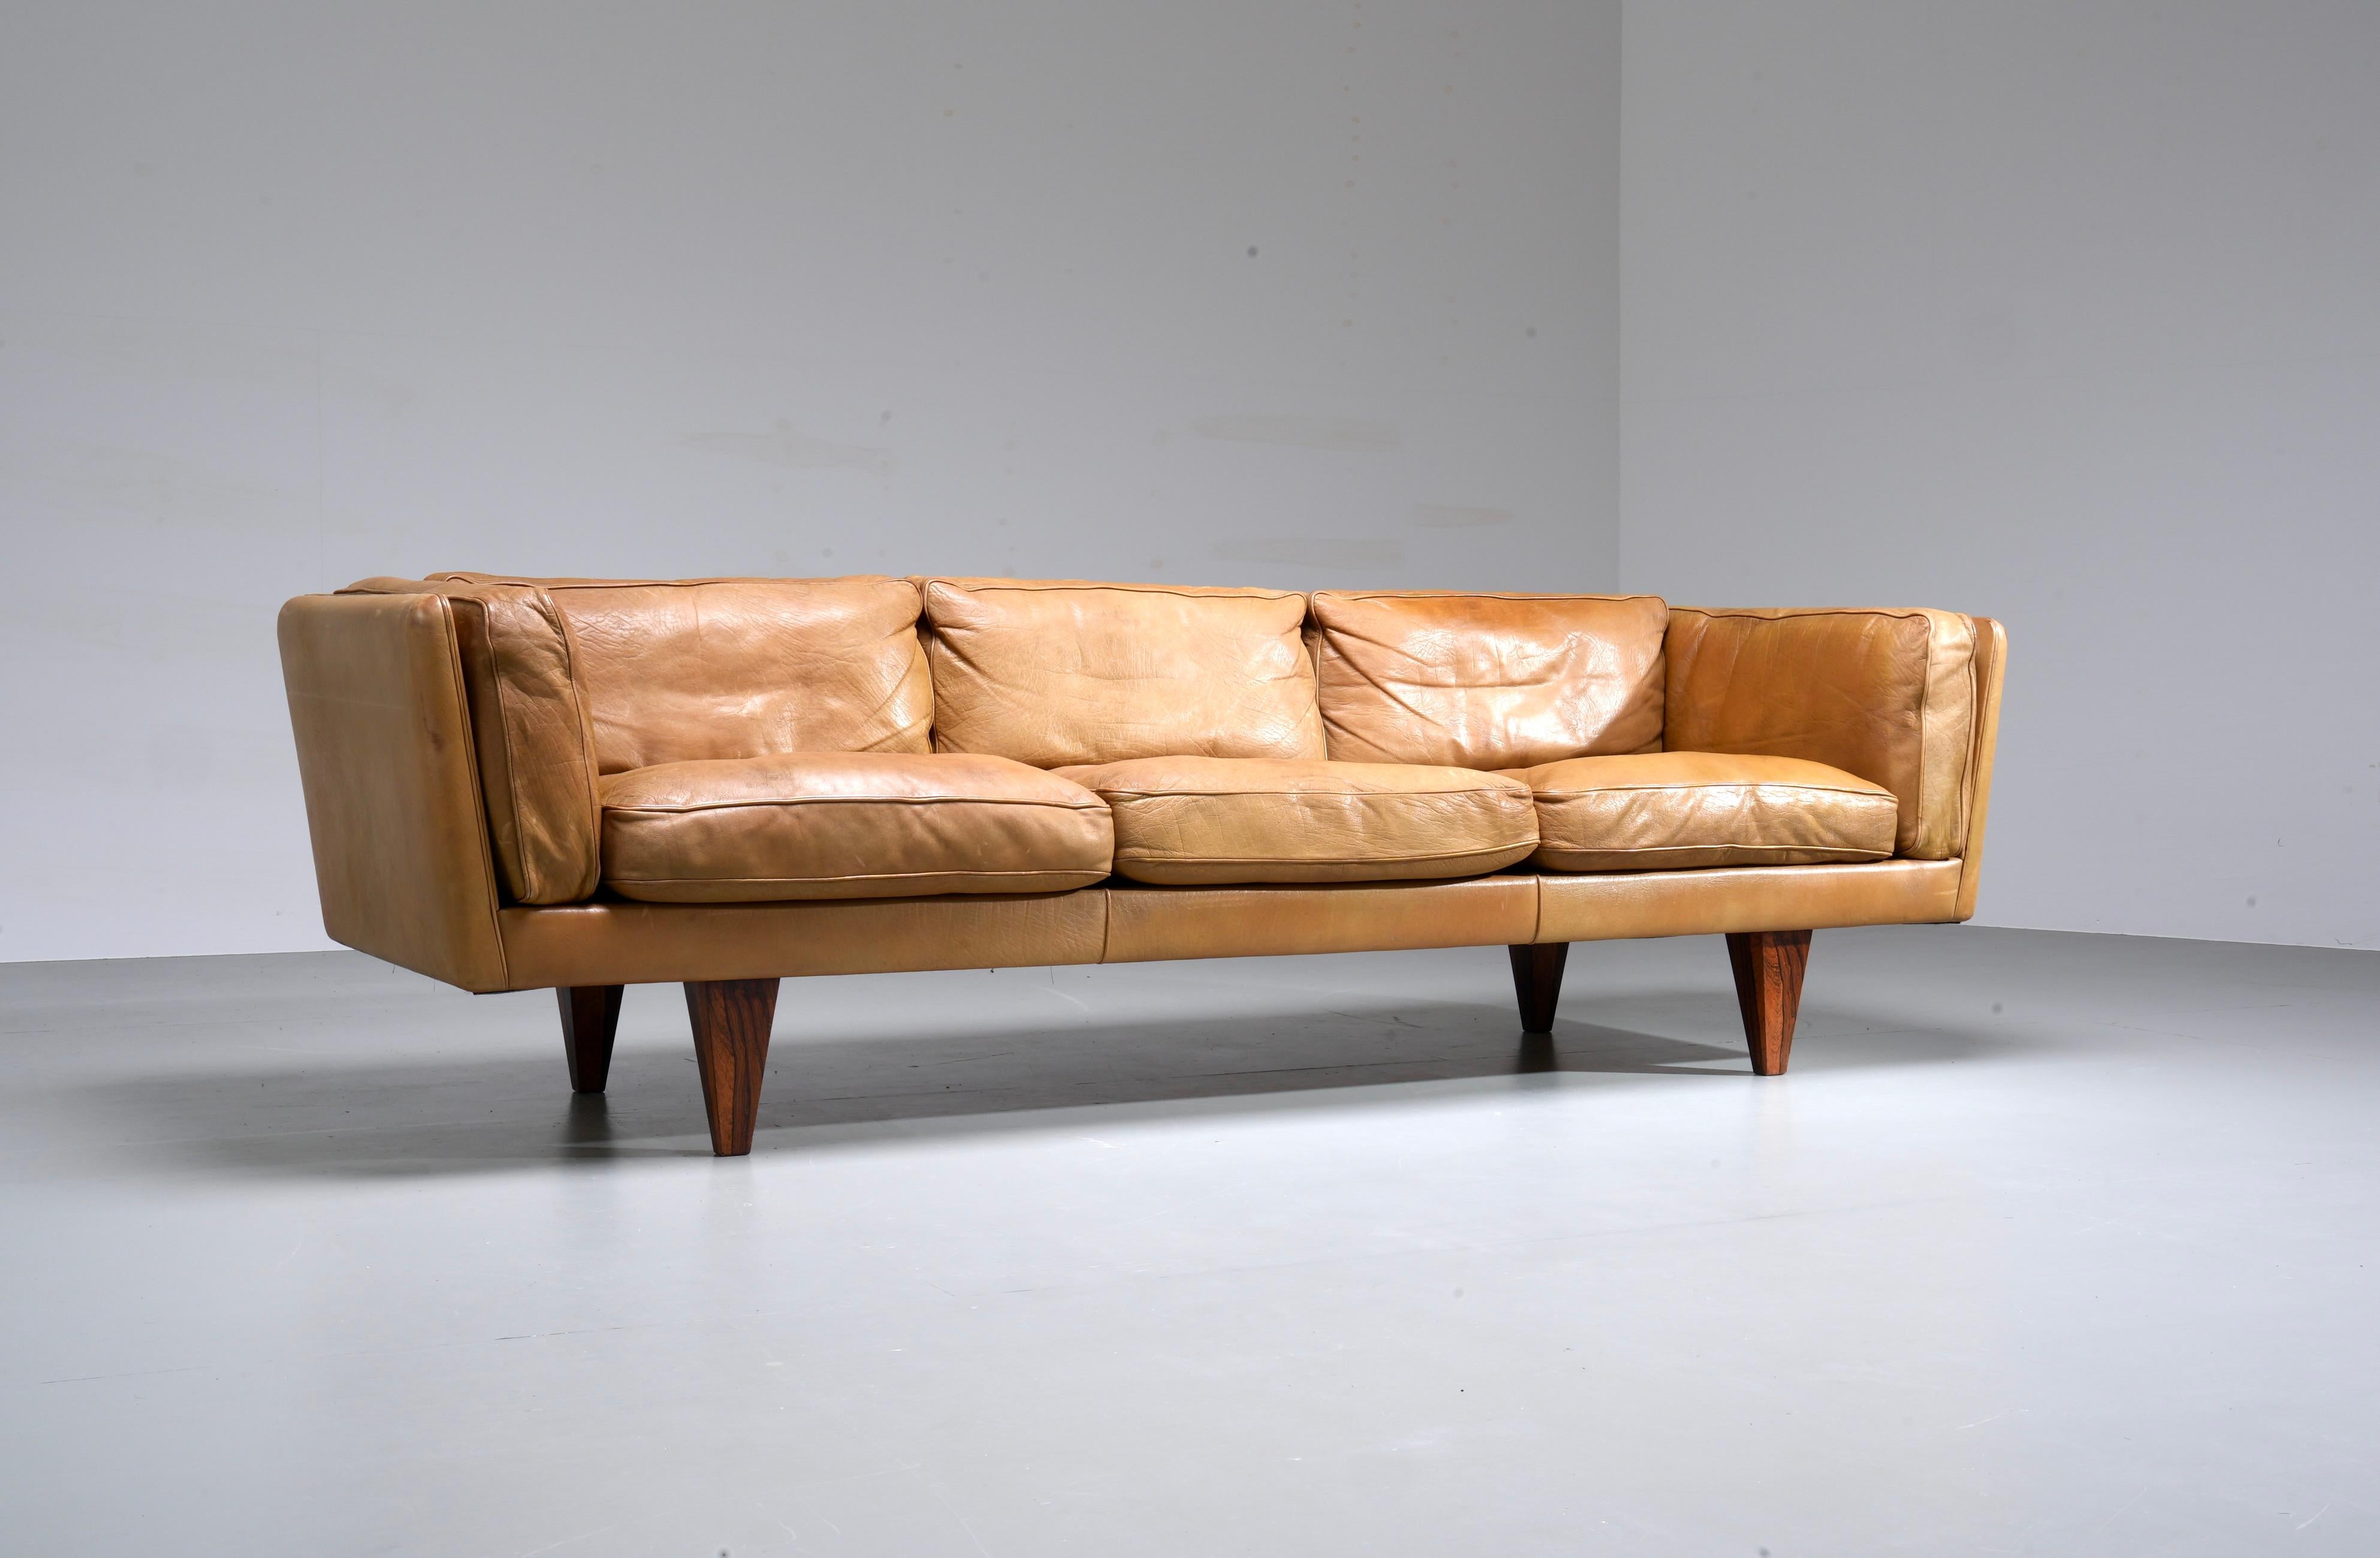 Illum Wikkelsø Three-seat ‘V11’ sofa in cognac coloured leather and wooden pyramid legs.

Perfect proportions is what makes this V11 sofa by Illum Wikkelsø so special. The leather runs all the way through, also at the back, making this sofa a